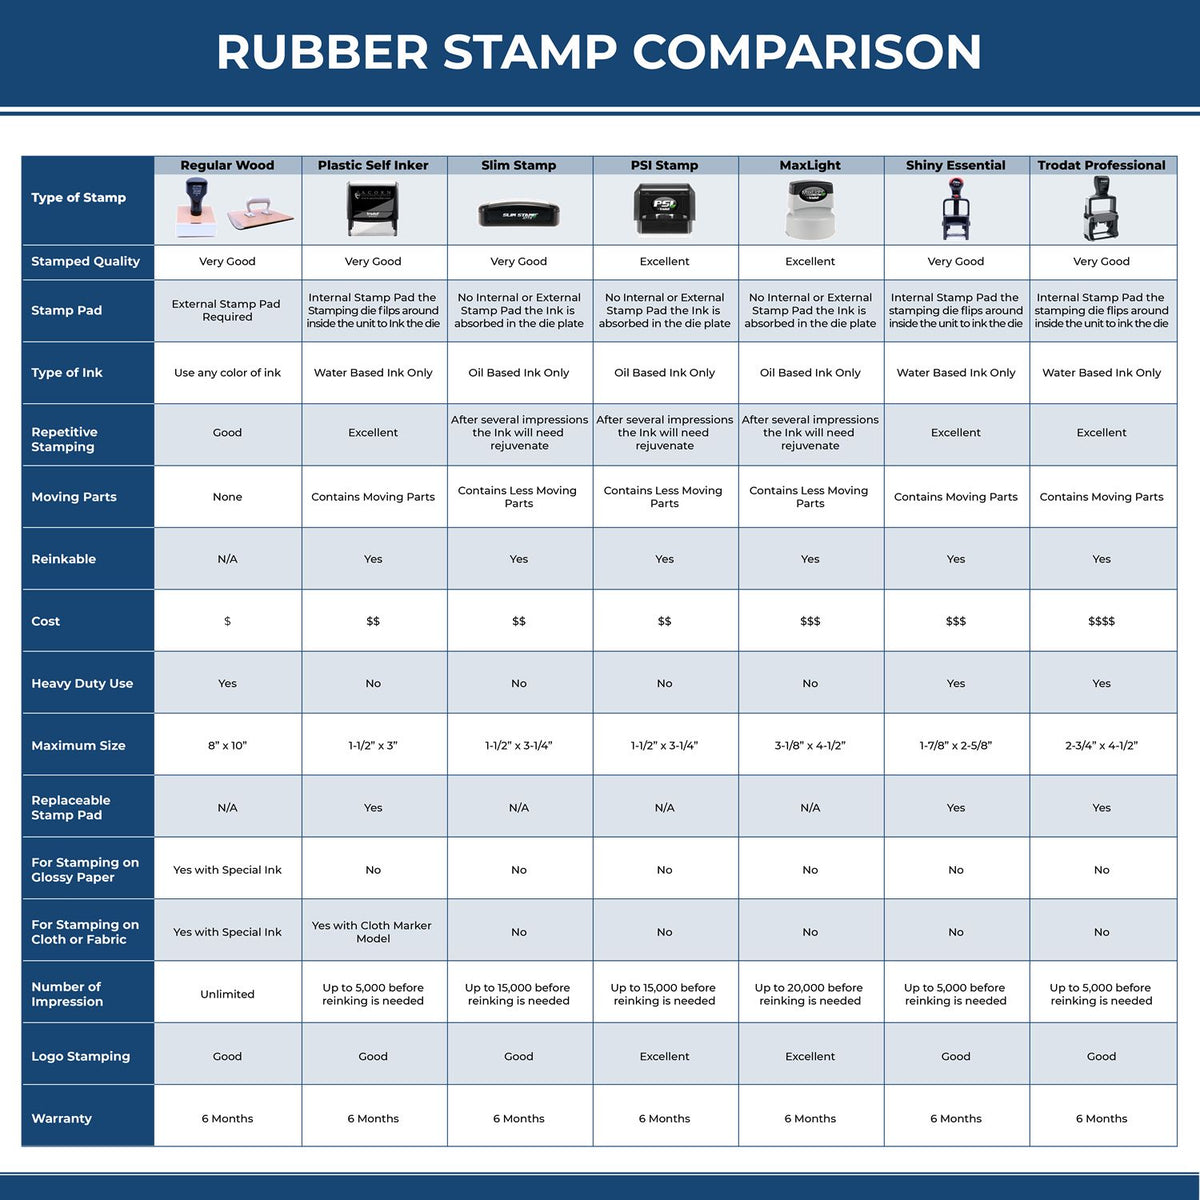 Distributed With Blank Line Rubber Stamp 4018R Rubber Stamp Comparison